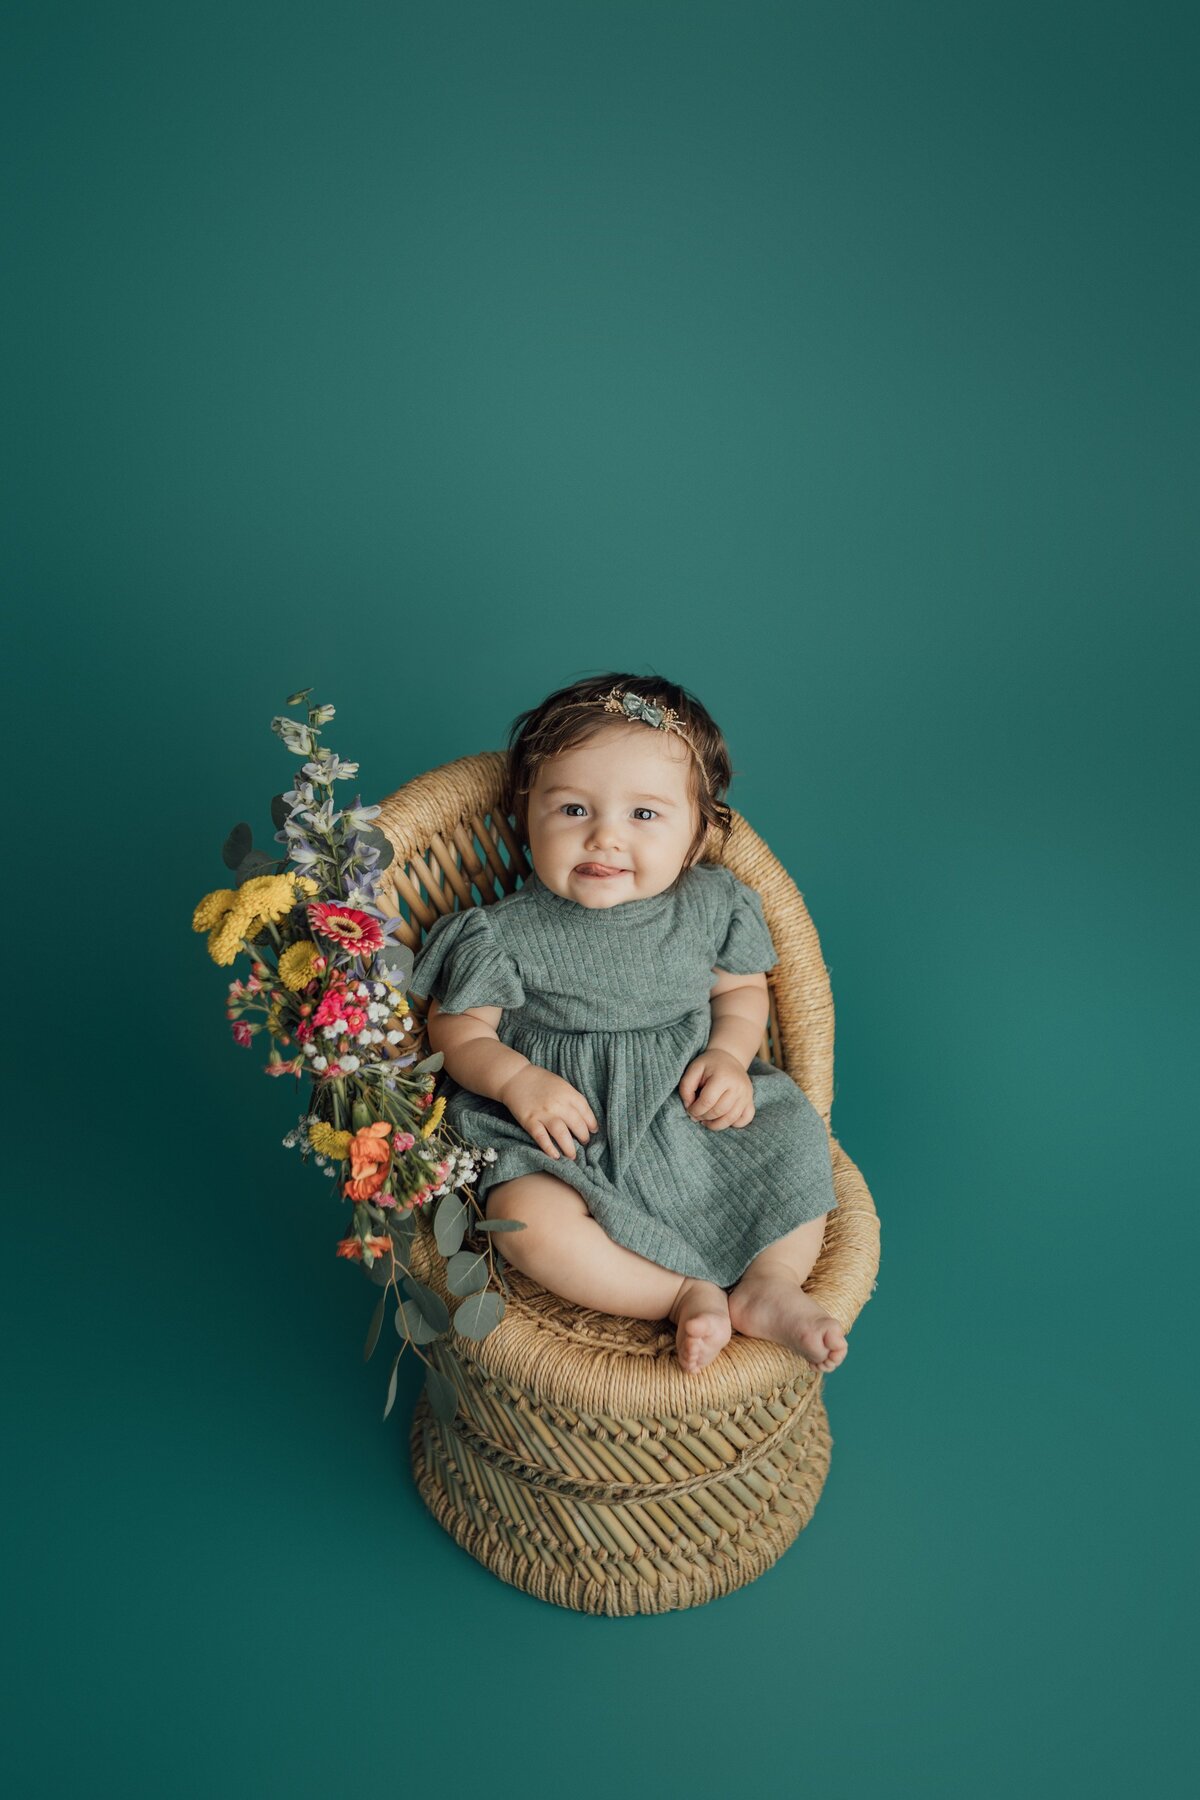 6 month girl on rattan chair during milestone session in st. pete